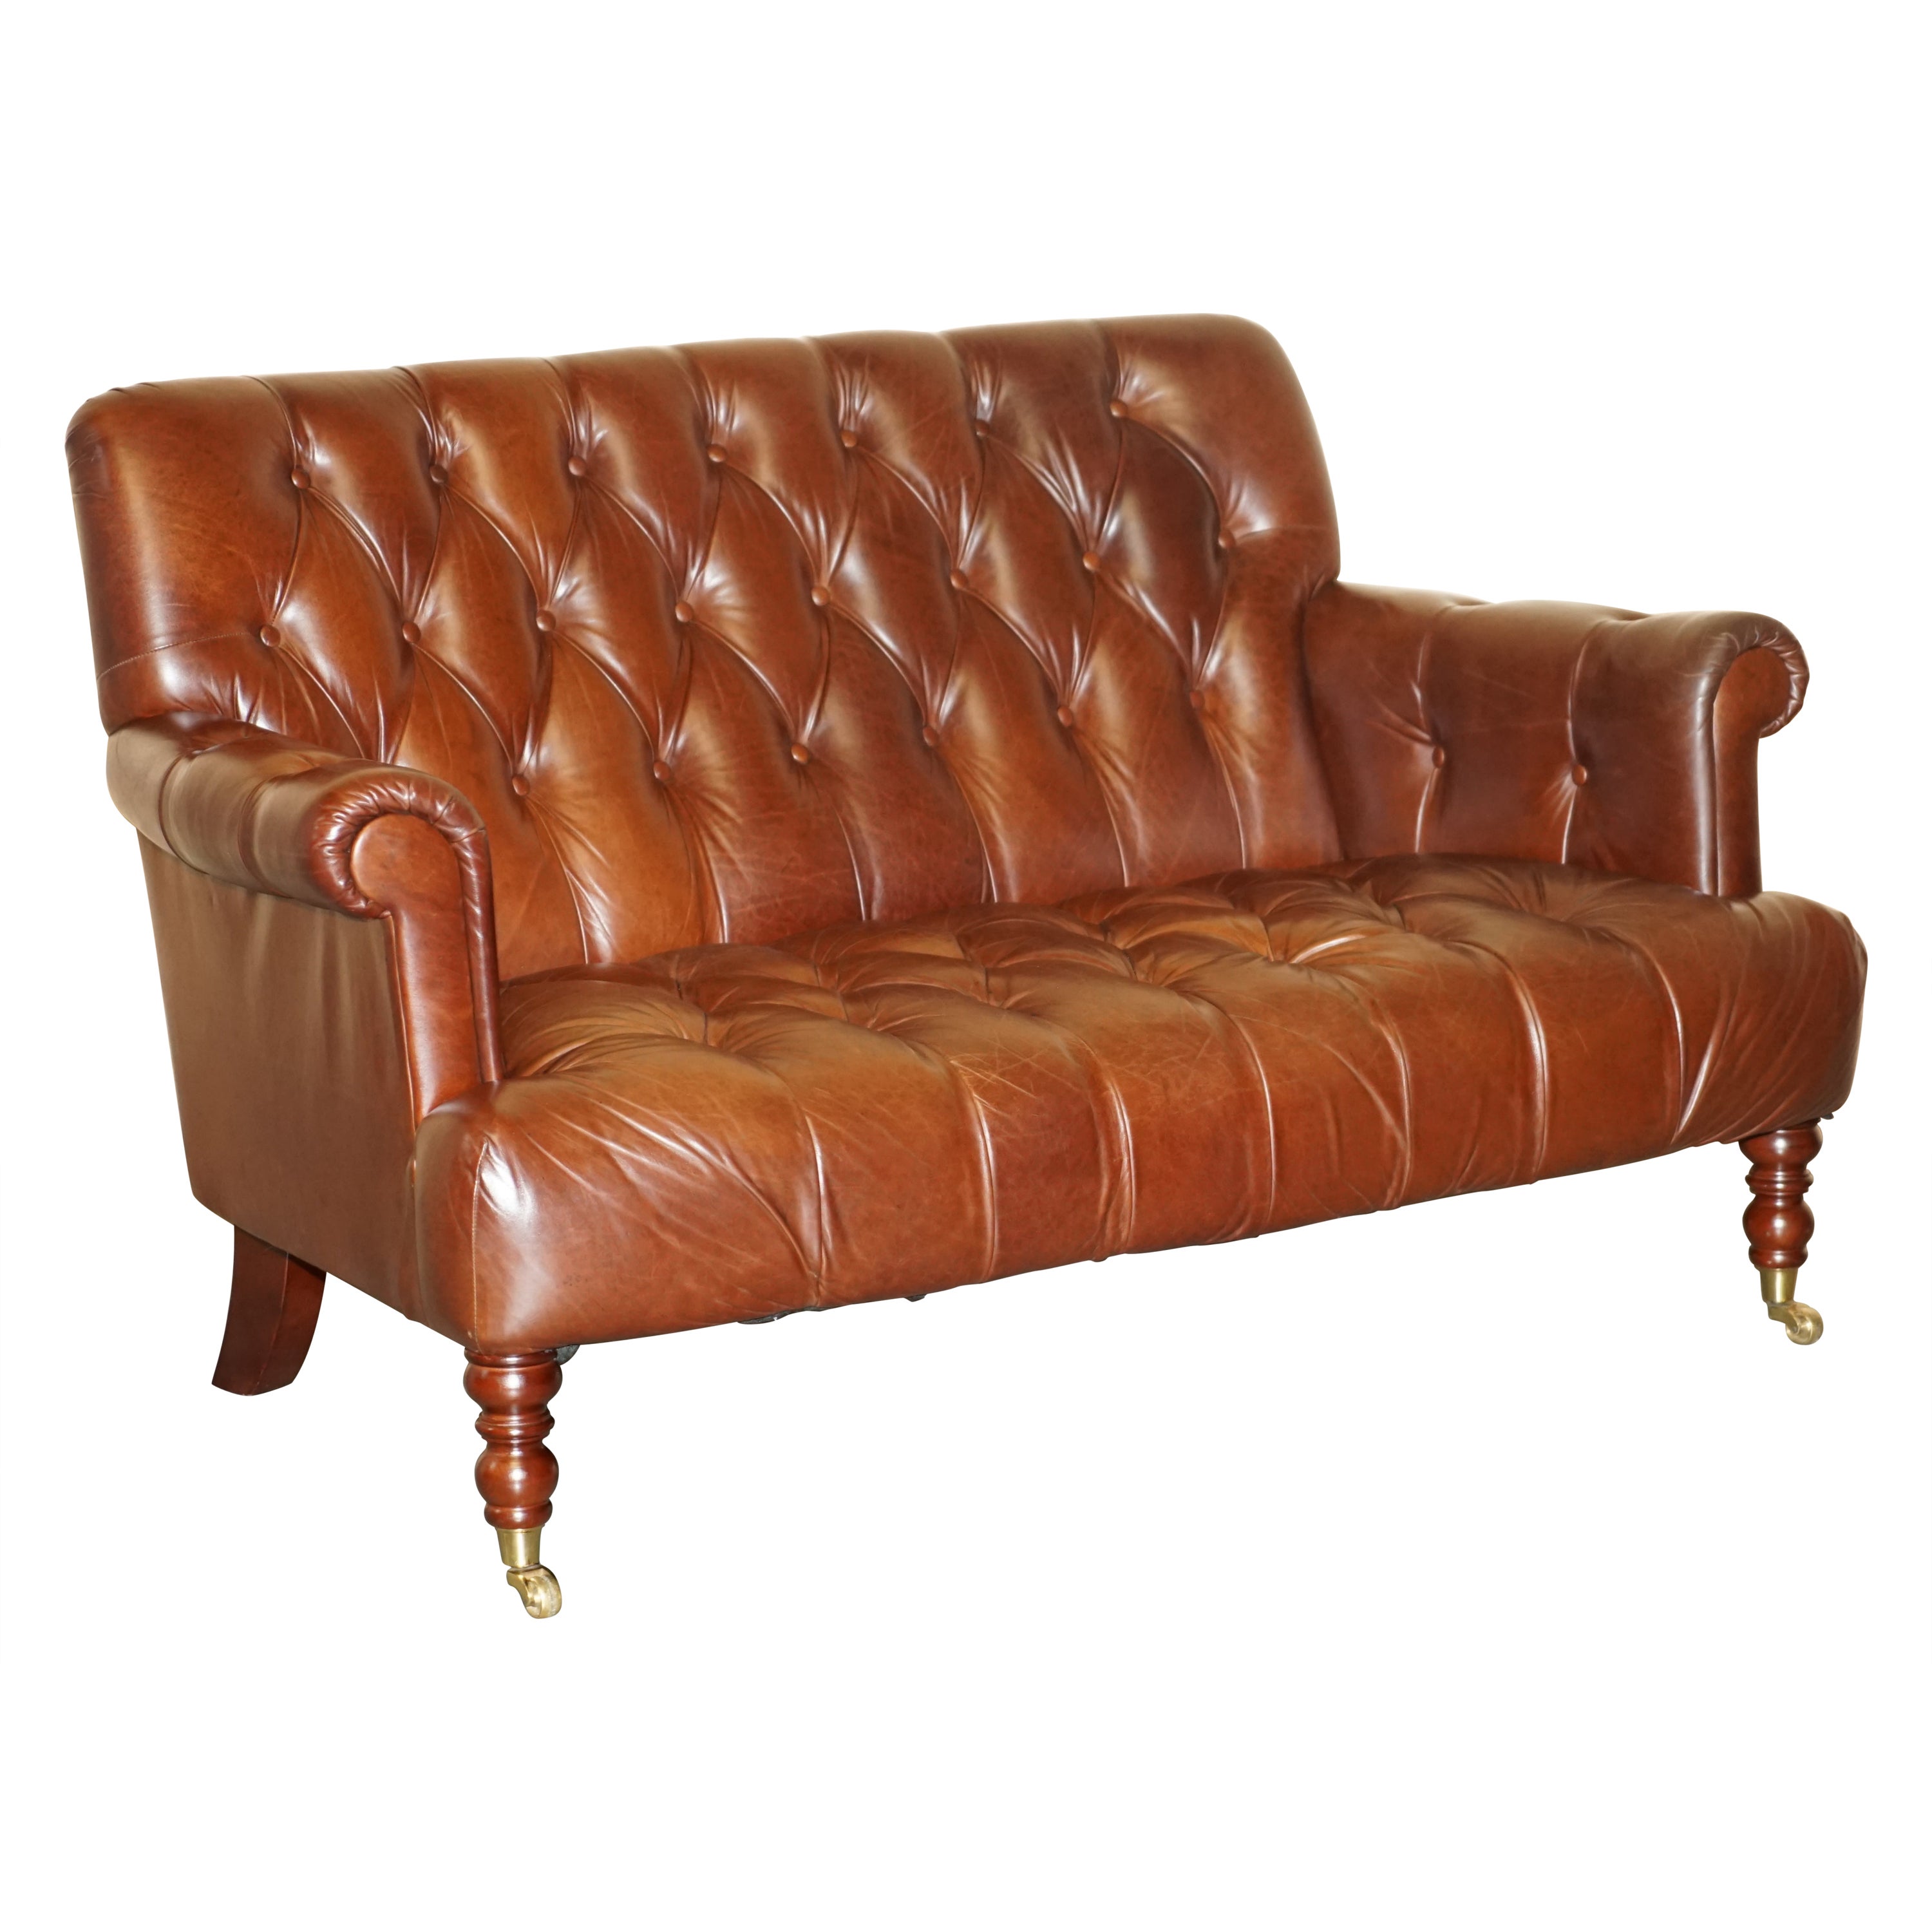 FiNE CHESTNUT BROWN LEATHER LAUREN ASHLEY CHESTERFIELD TWO SEAT LIBRARY SOFa For Sale